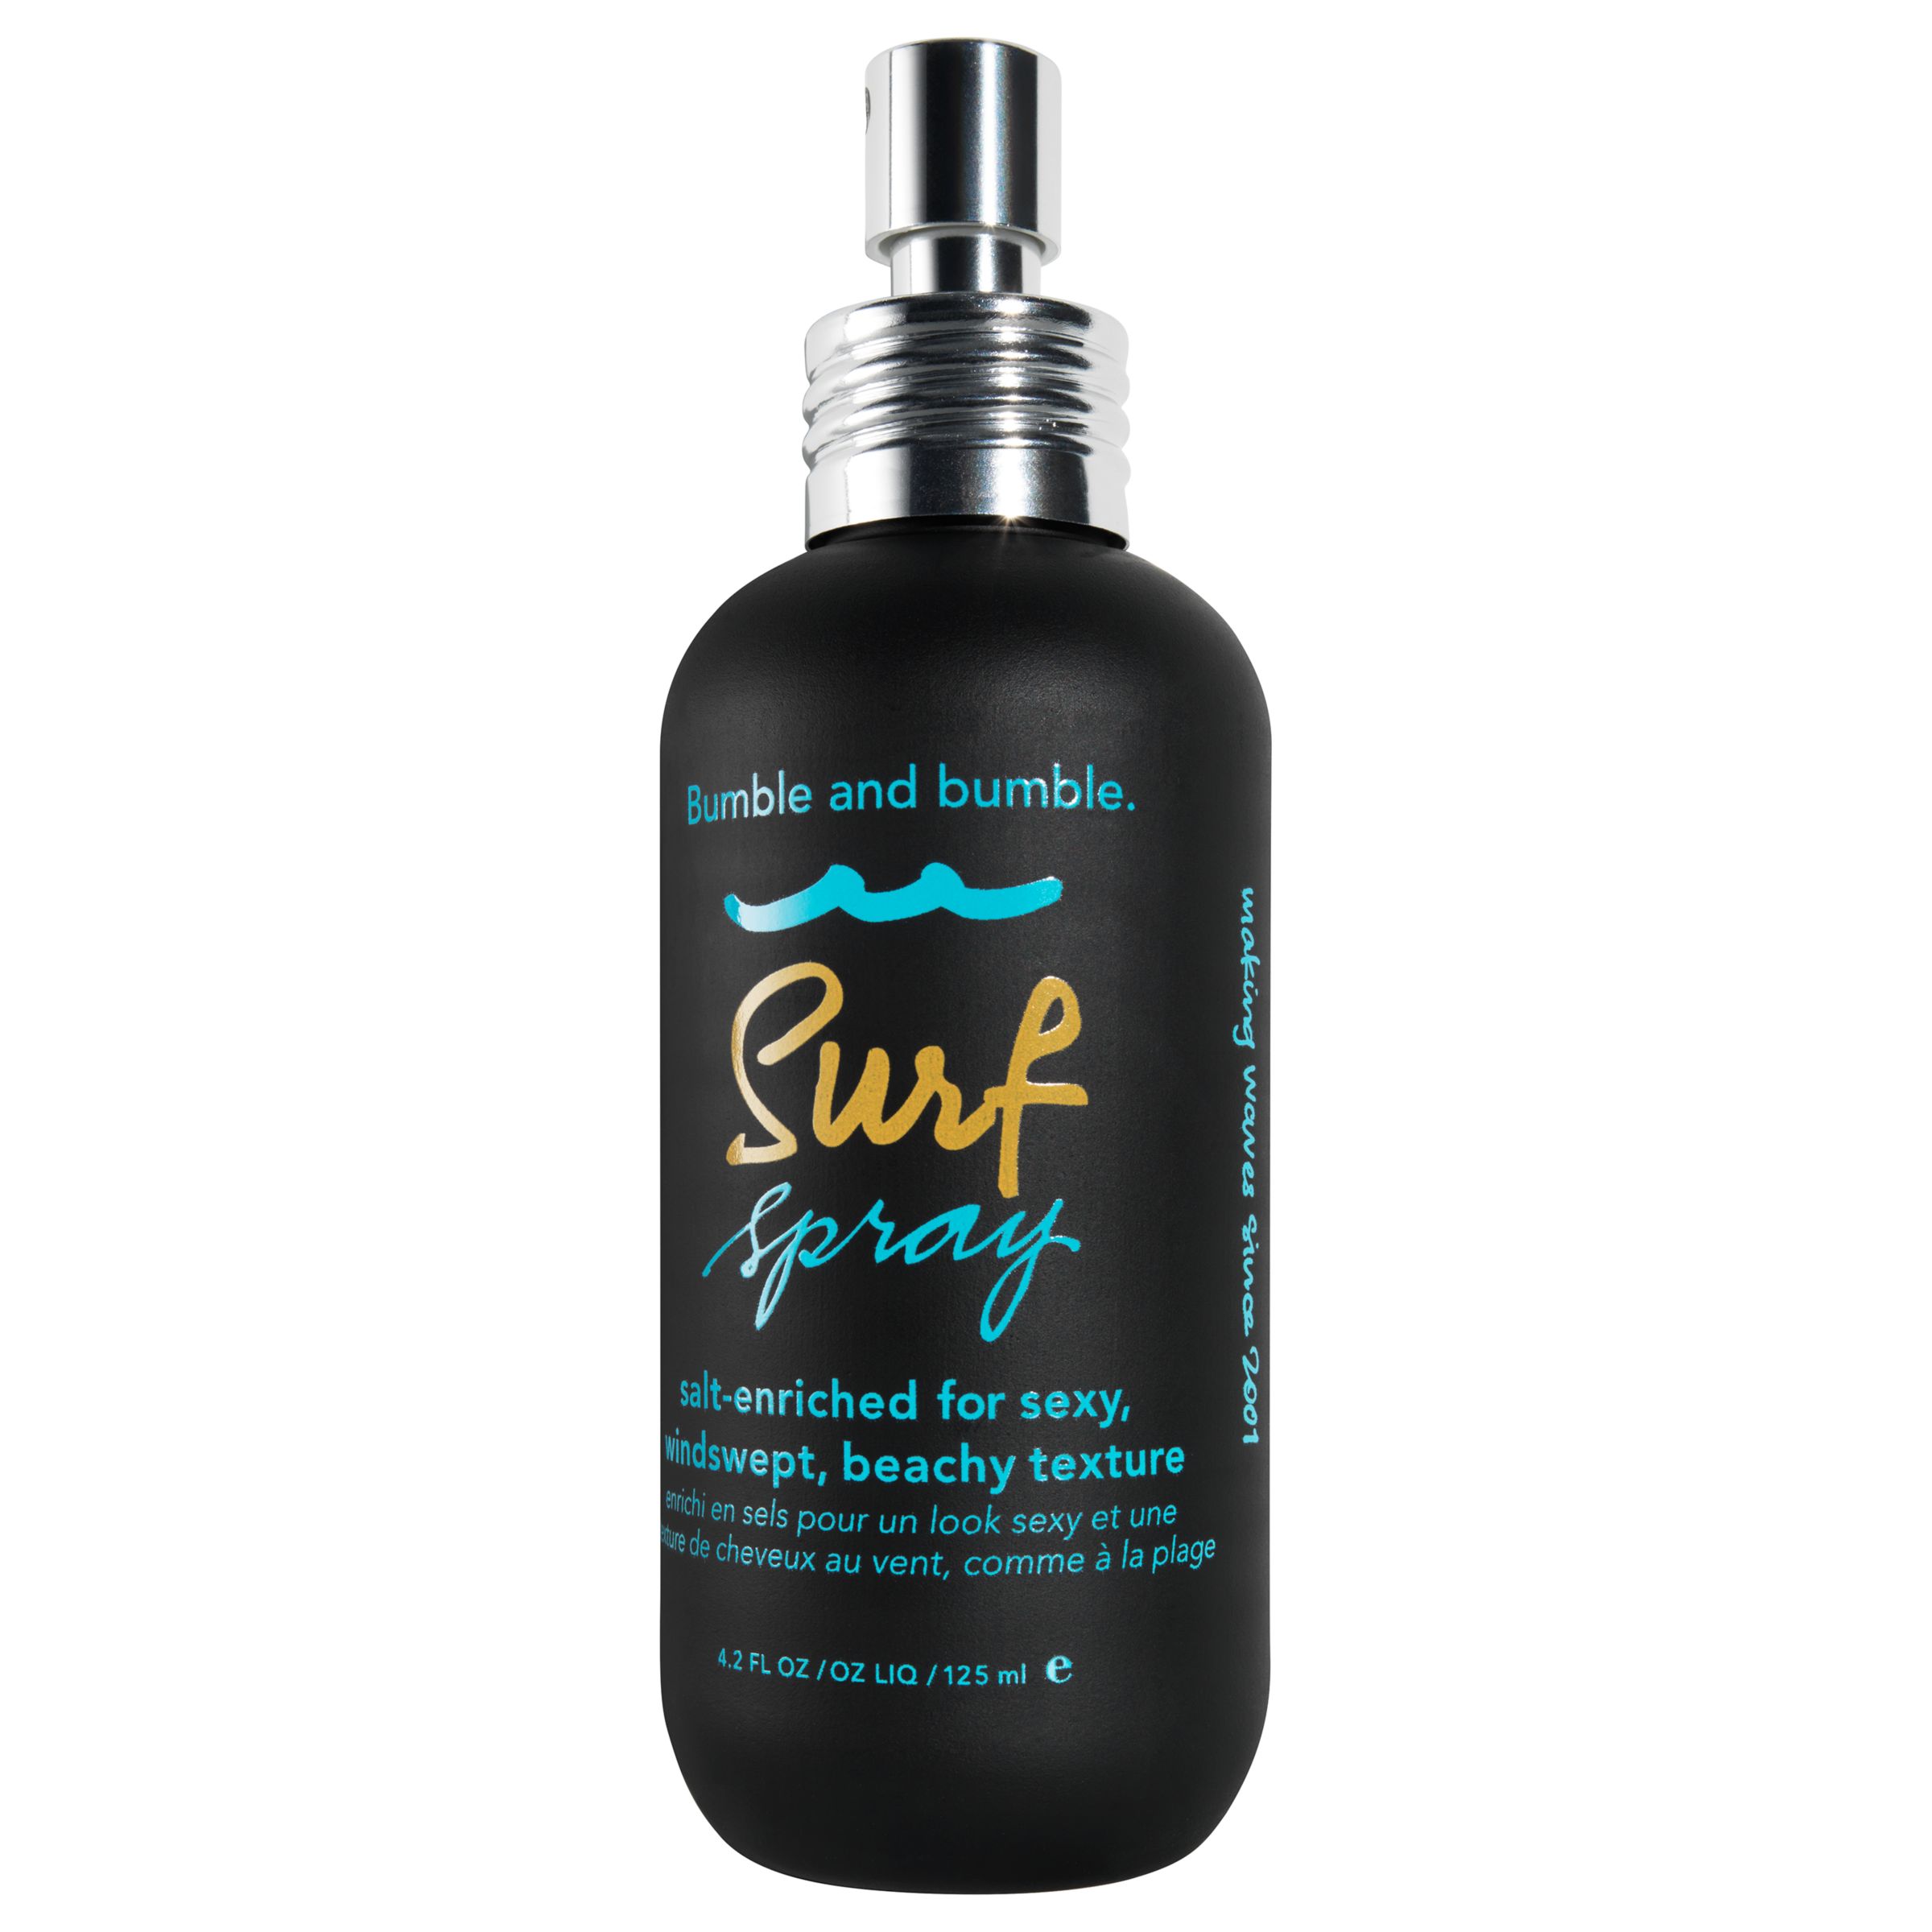 Bumble and bumble Surf Spray, 125ml 1